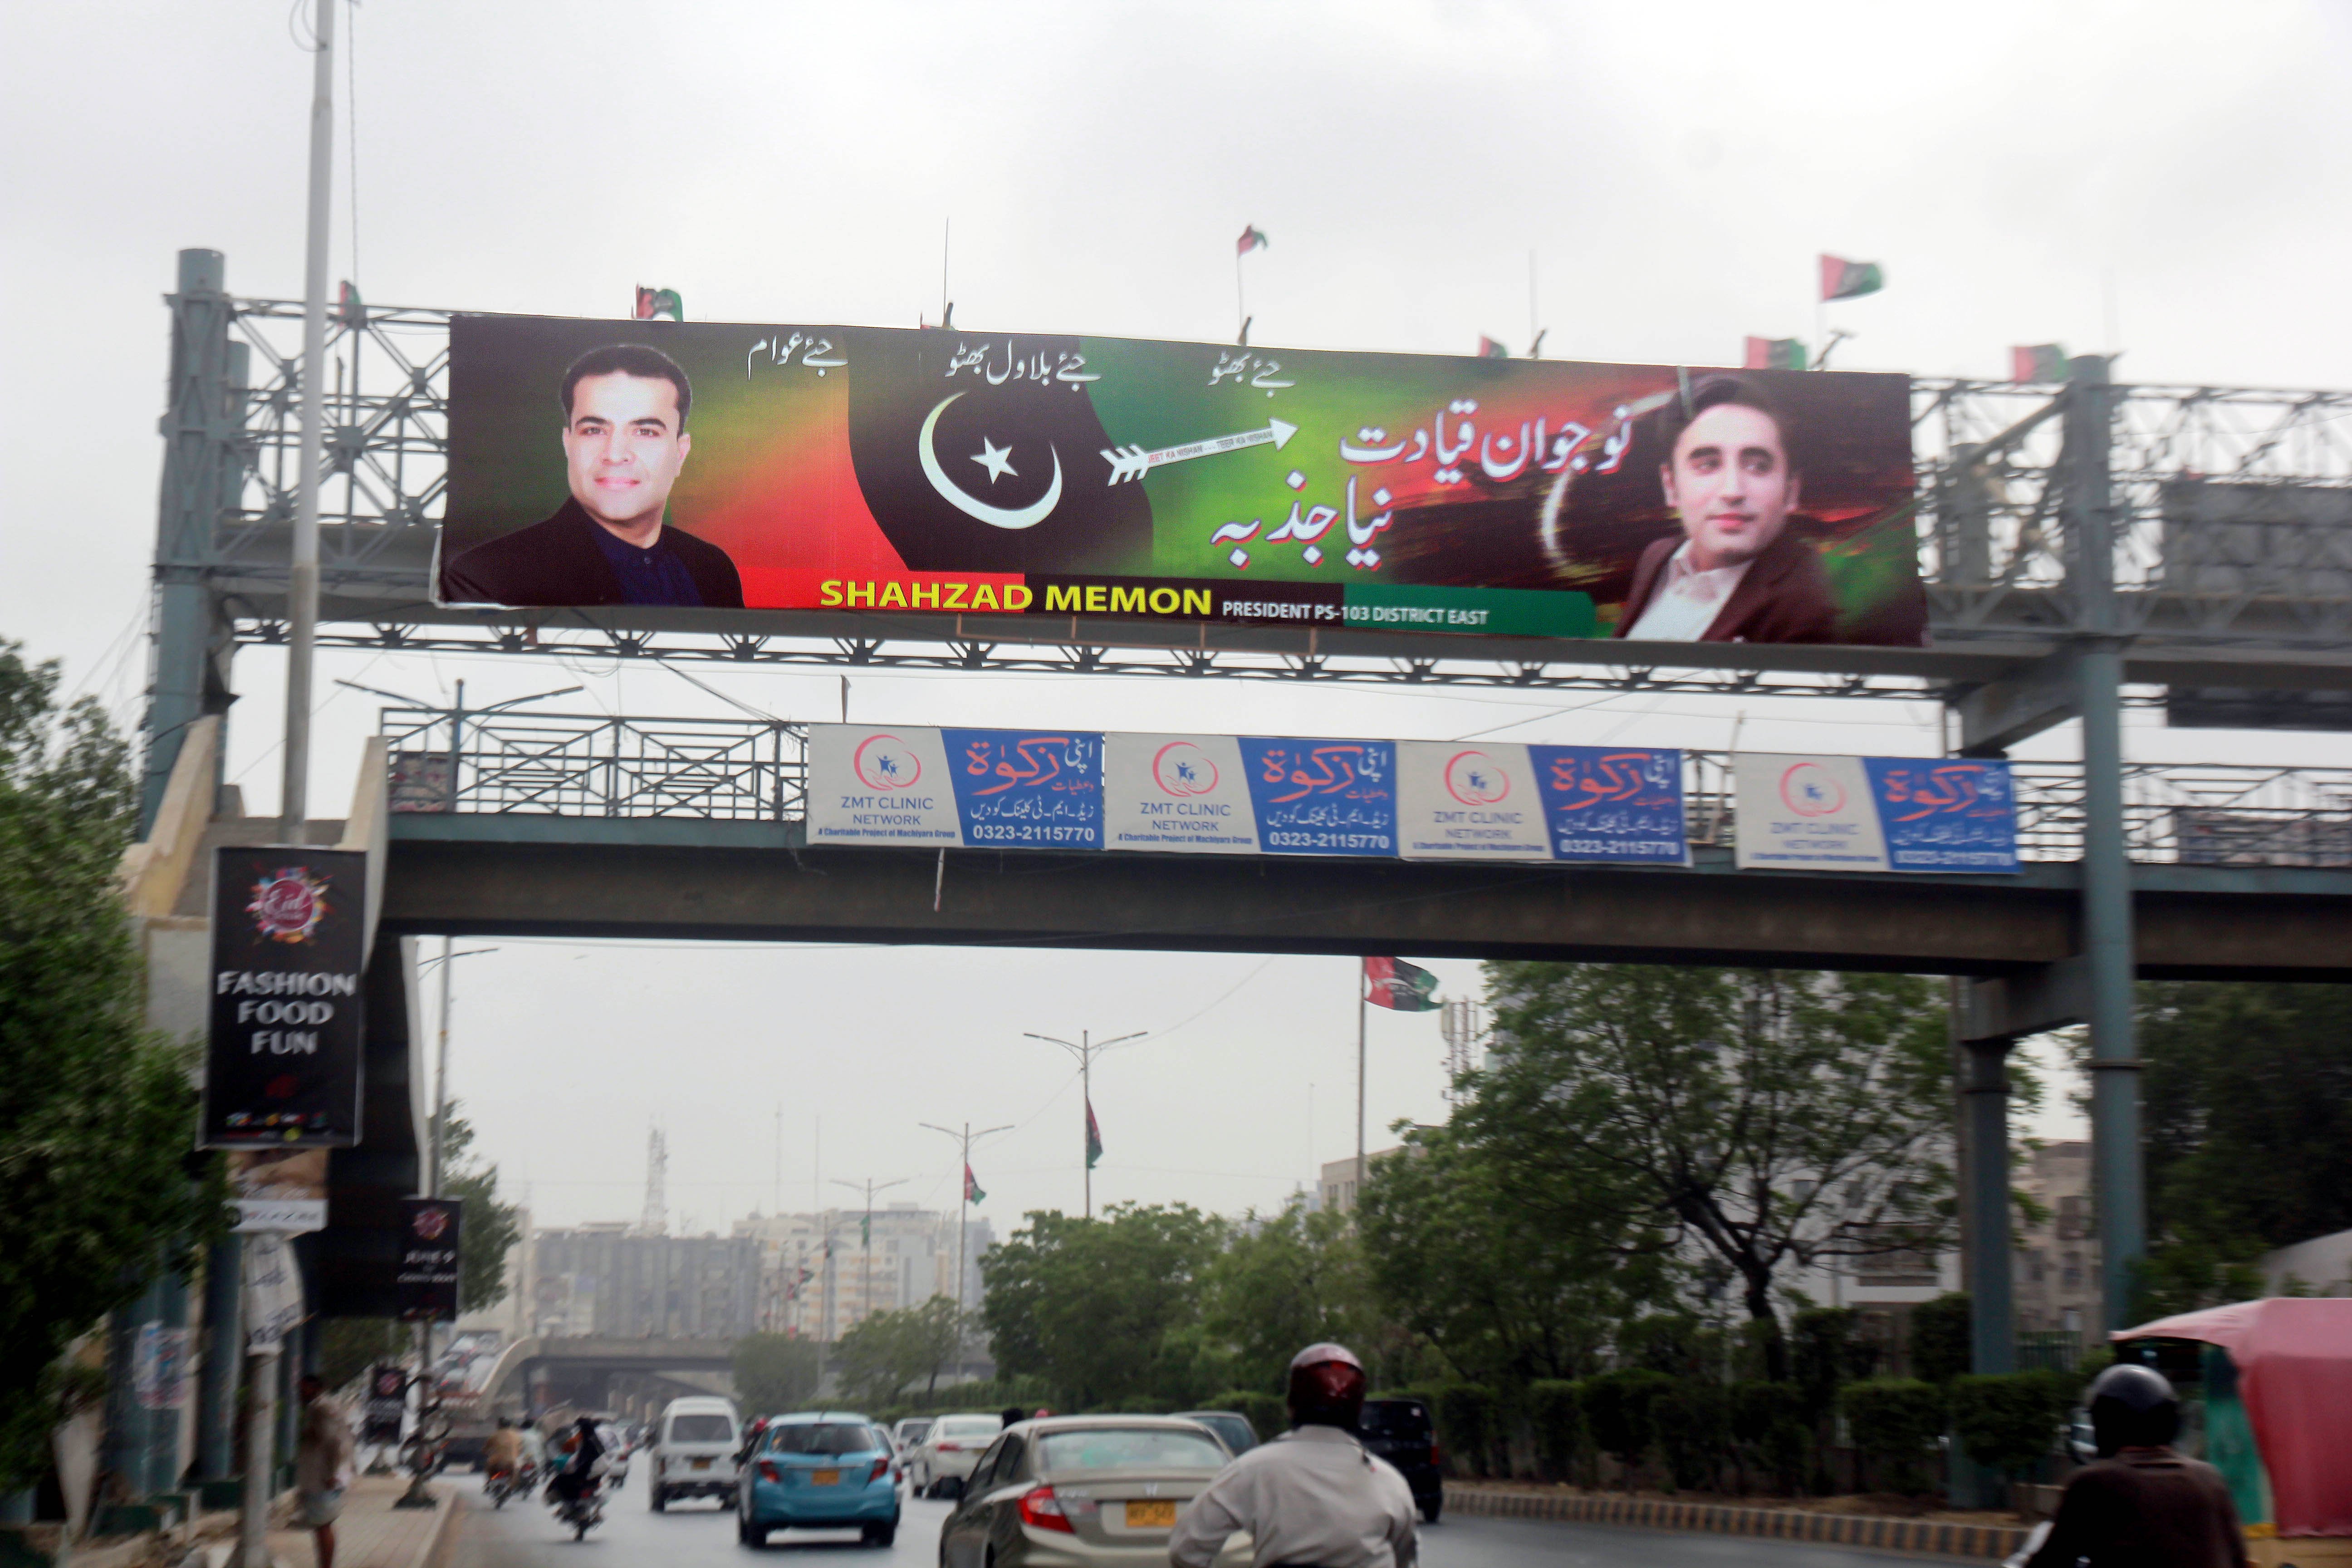 defying court orders political parties deface karachi in run up to elections